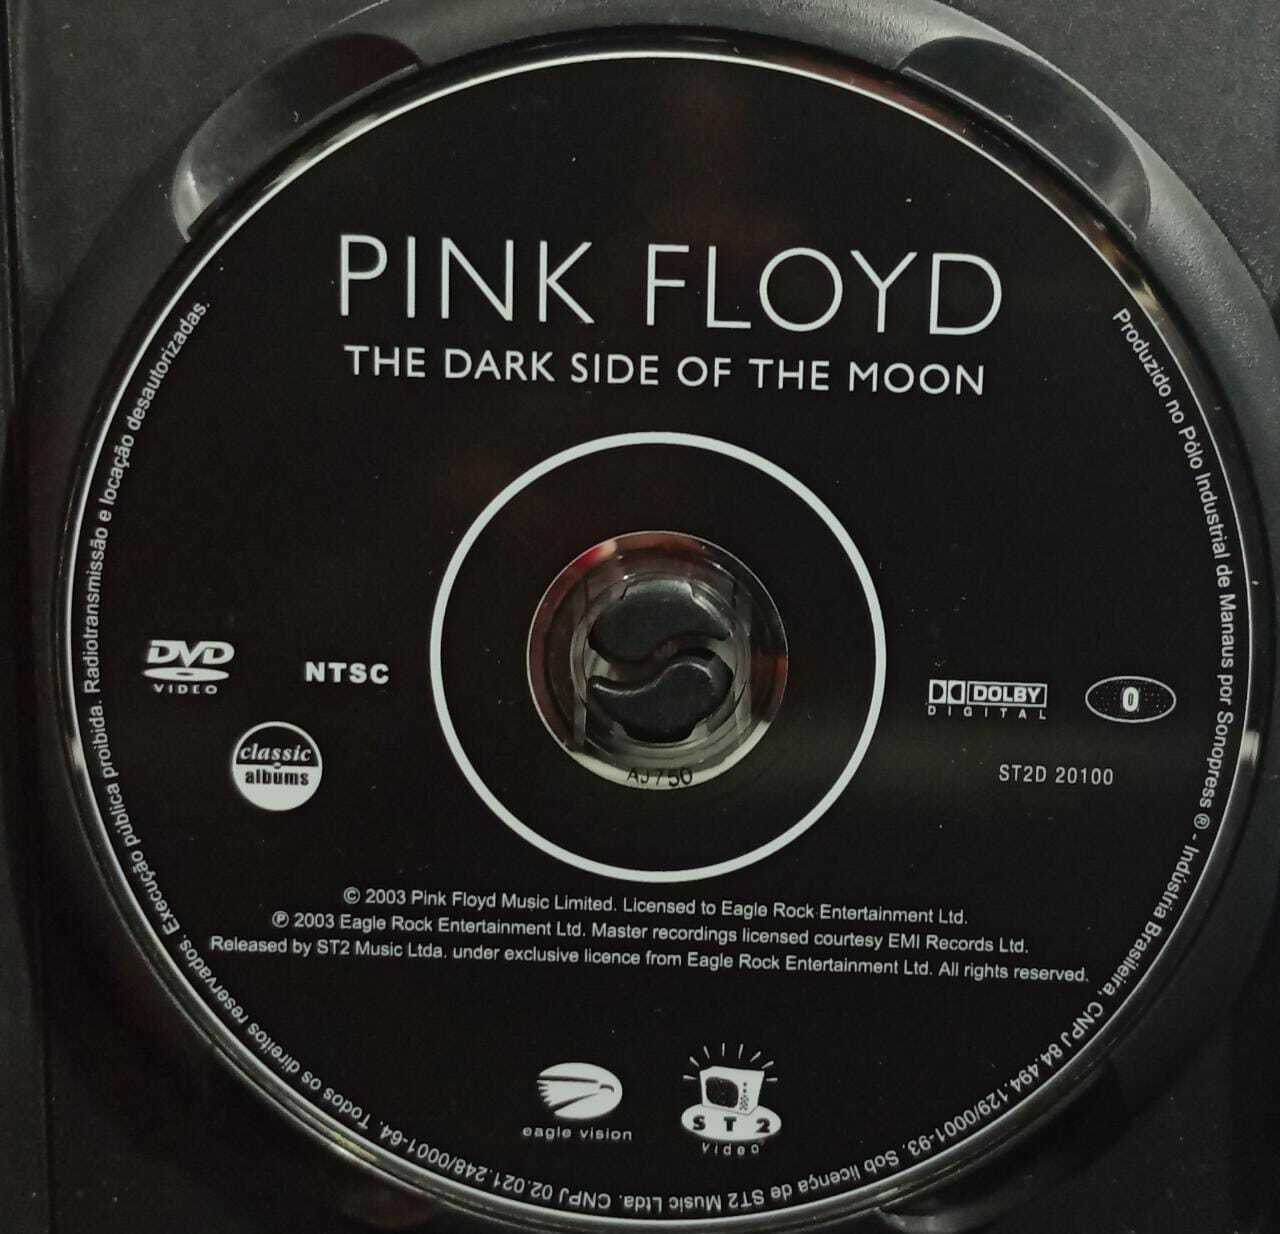 DVD - Pink Floyd - Classic Albums The Dark Side Of The Moon